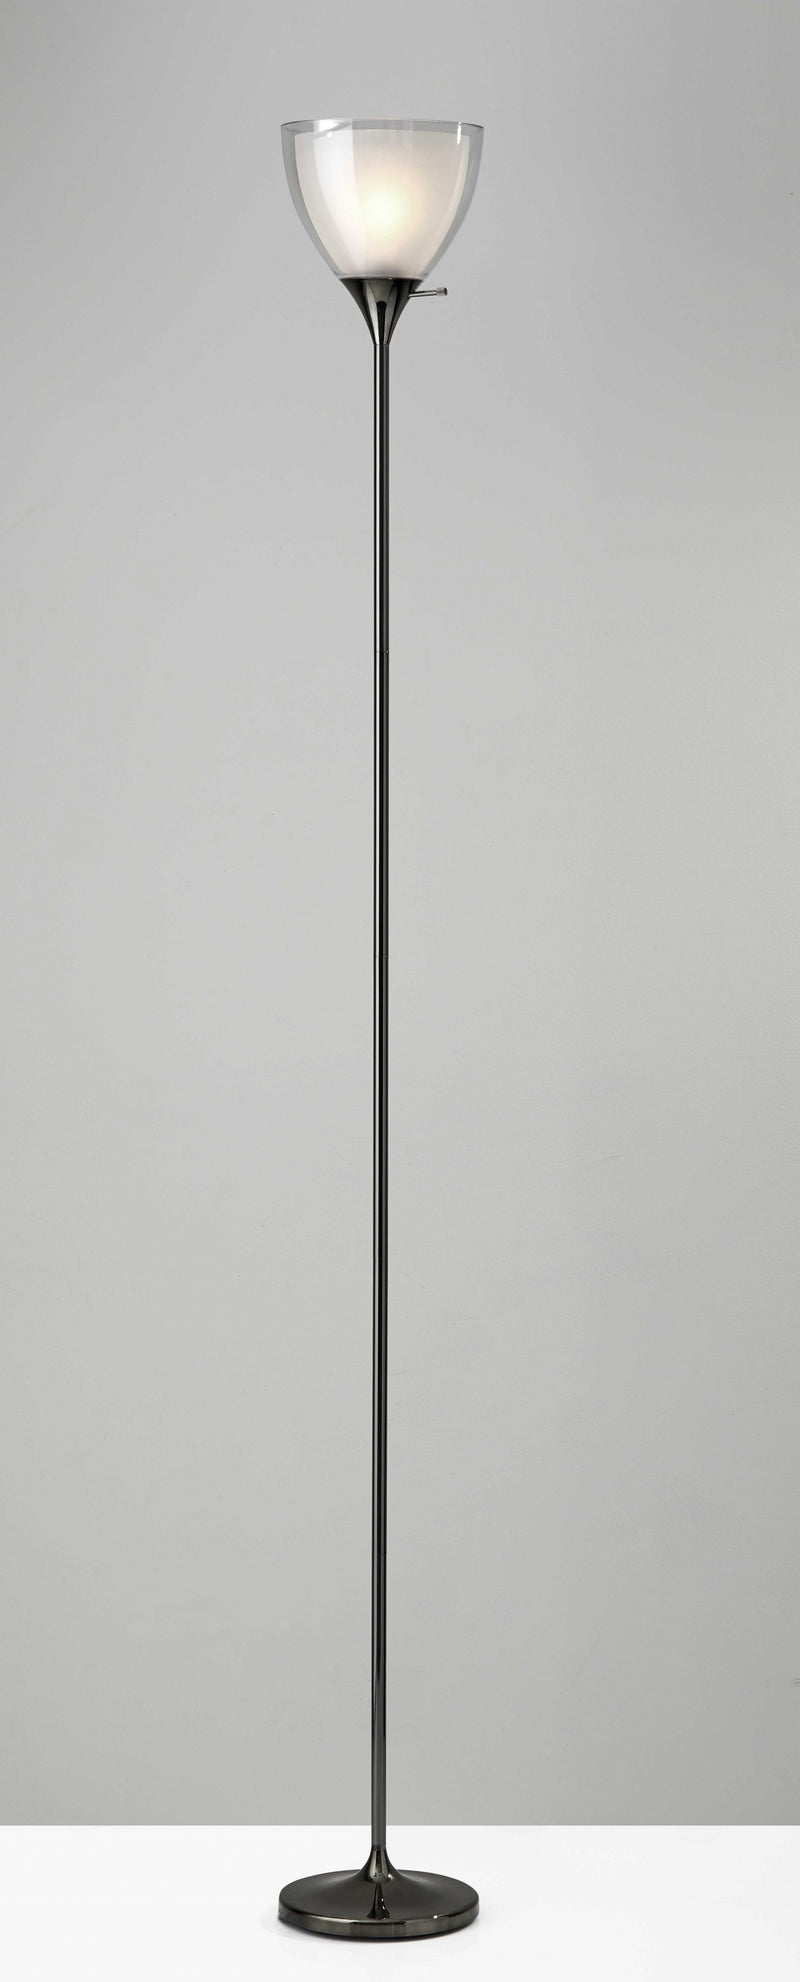 Shiny Black Nickel Finish Metal Torchiere Floor Lamp With Frosted Inner Shade